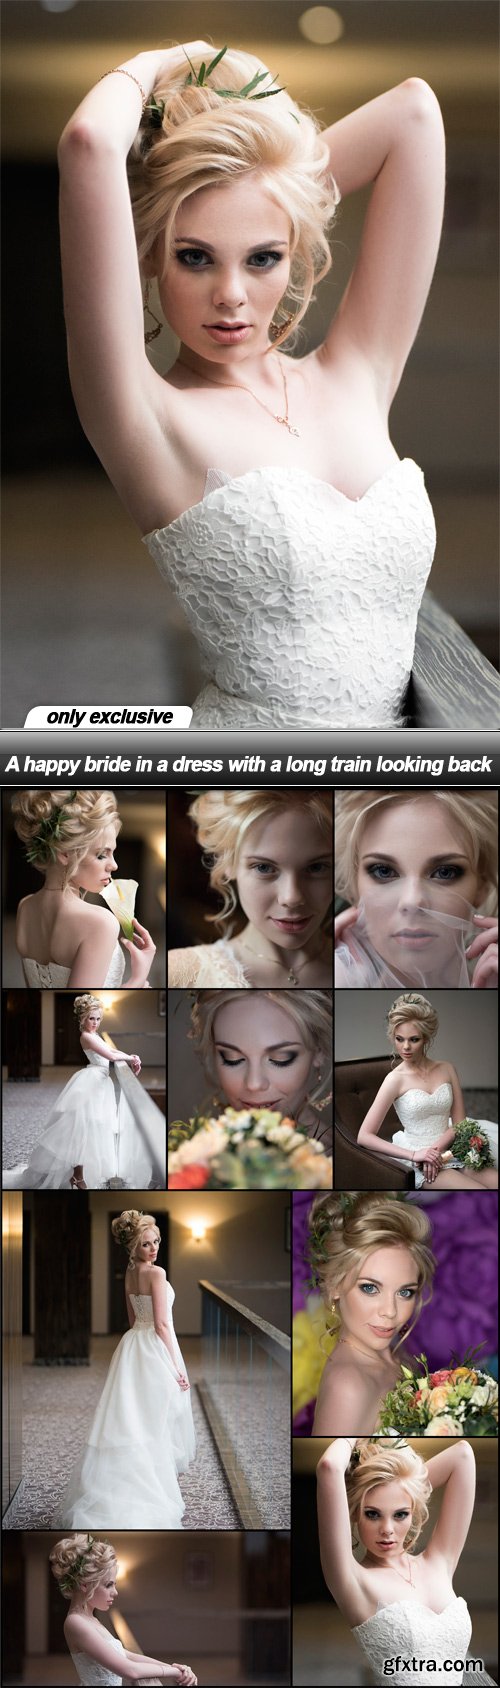 A happy bride in a dress with a long train looking back - 10 UHQ JPEG